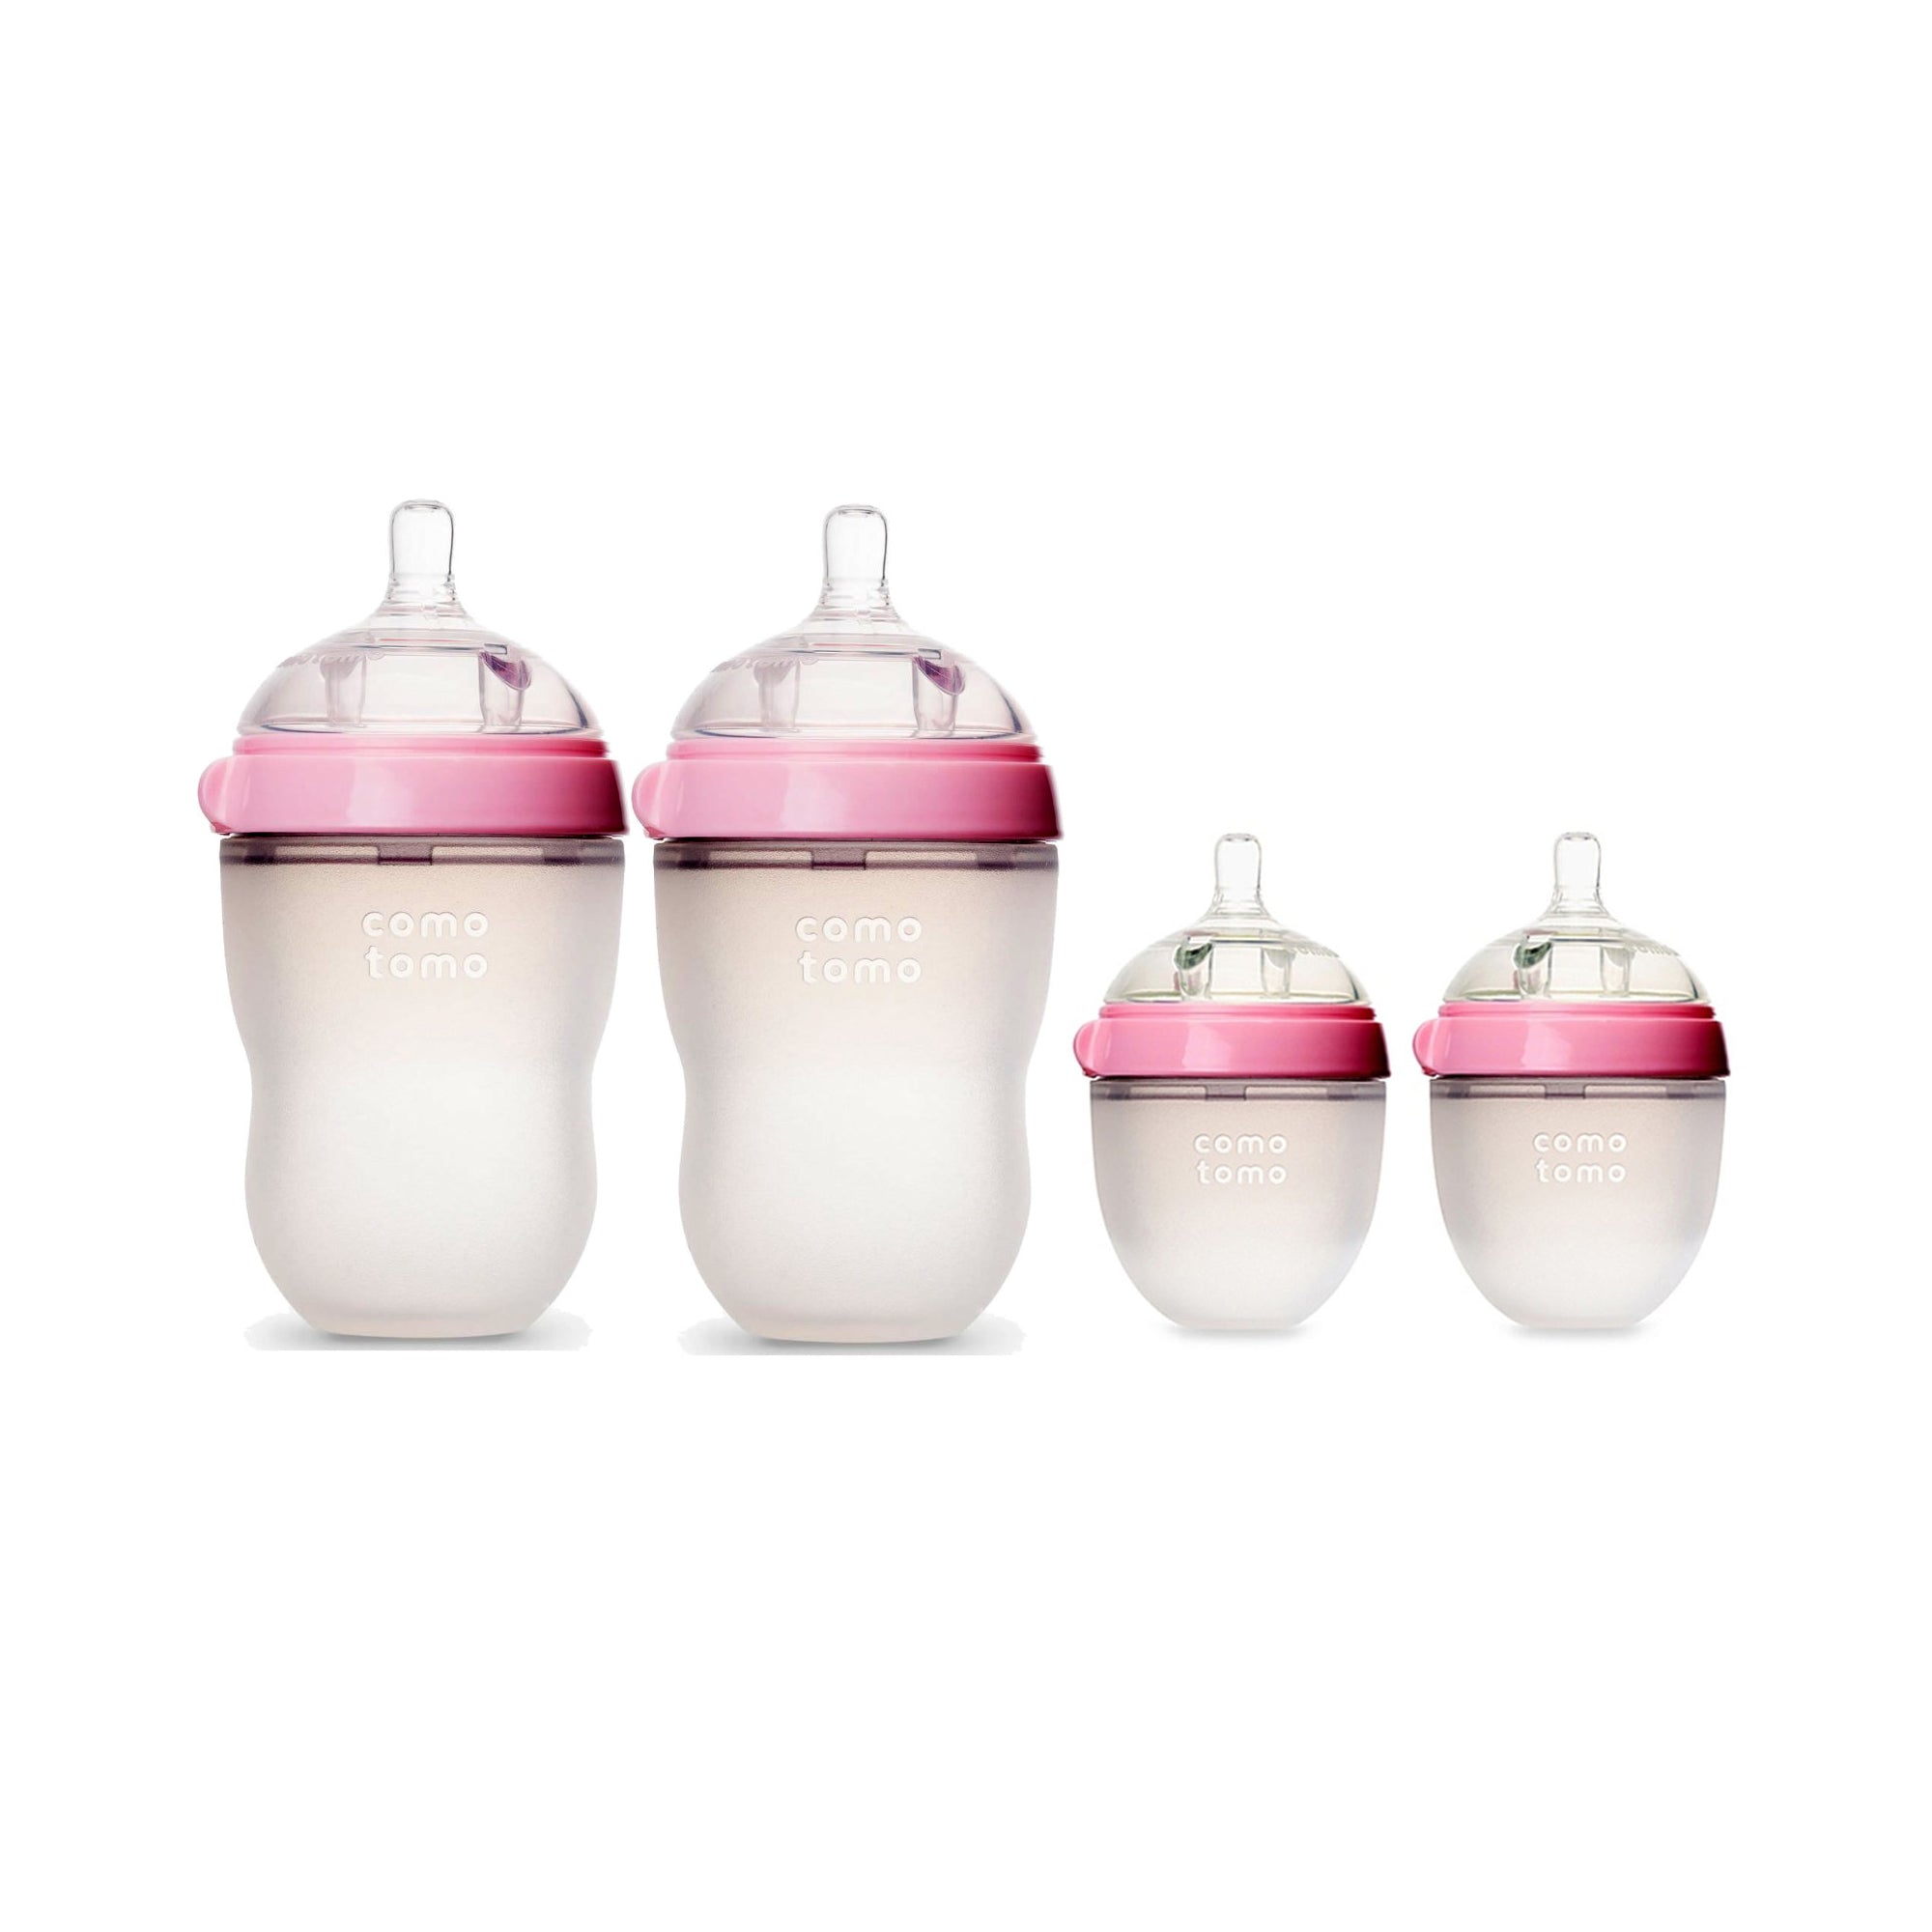 Comotomo Baby Bottle 8-Ounce and 5-Ounce Kit, Pink, Pack of 4 - ANB Baby -$20 - $50